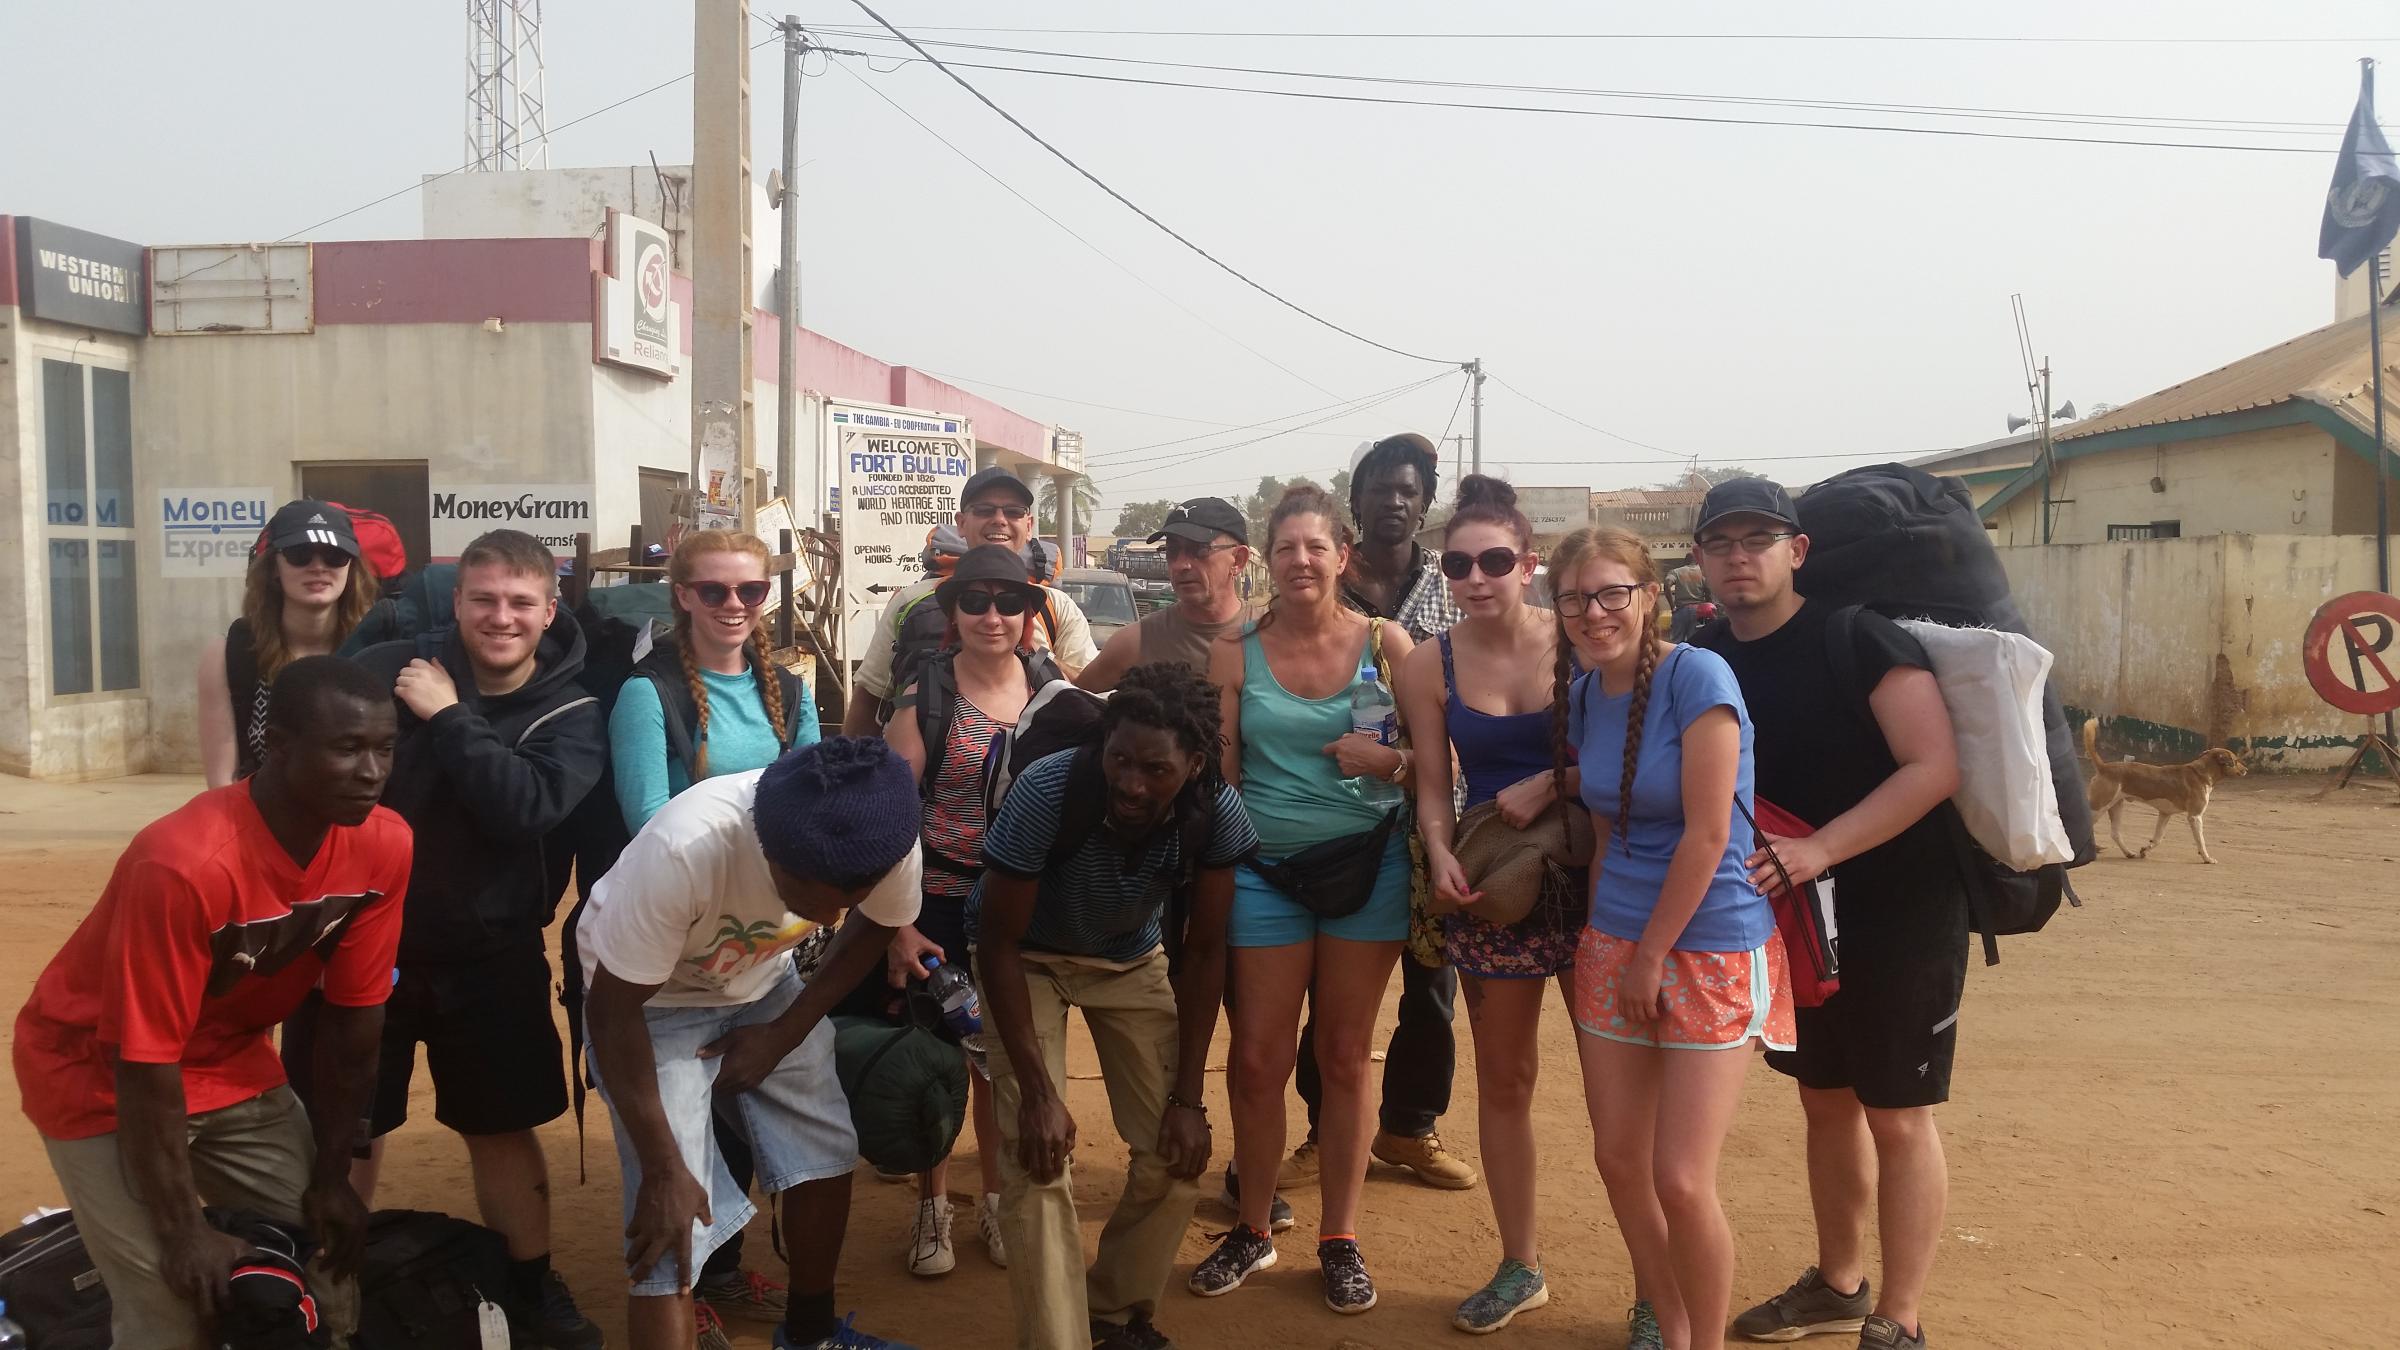 'We are gutted' - Darwen volunteer trip to The Gambia cancelled